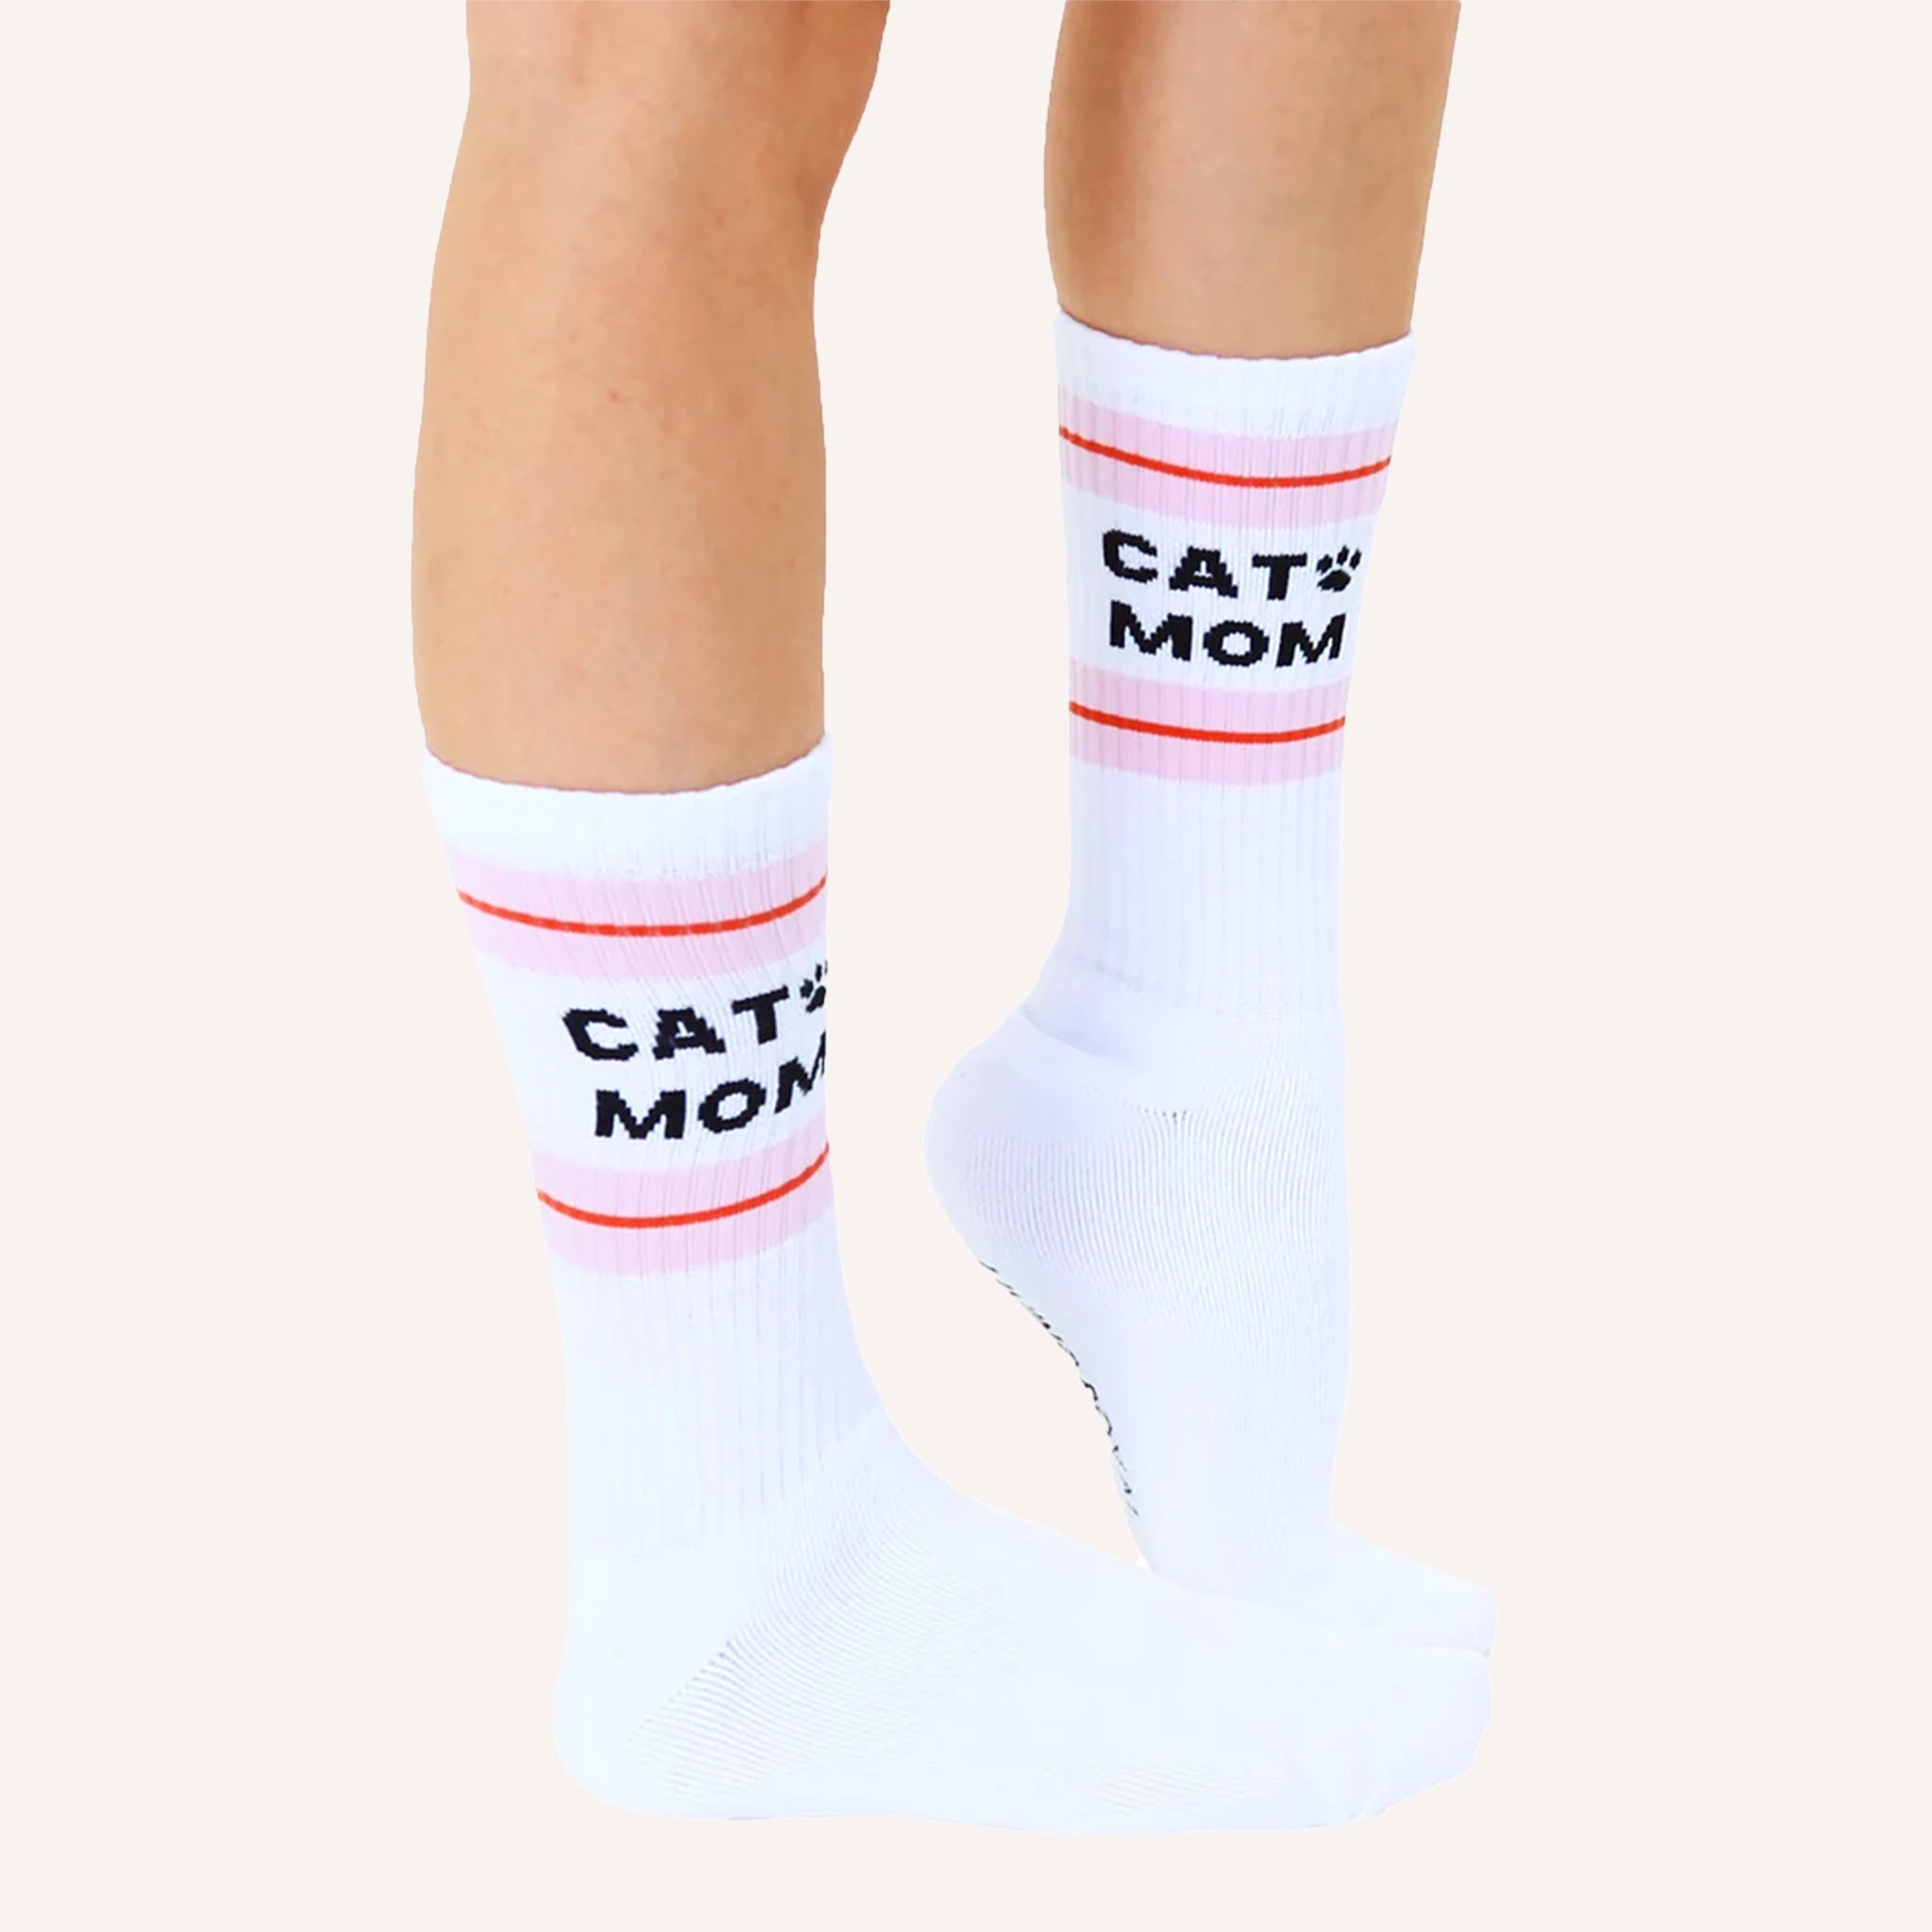 White crew socks with a pink and red striped design at the top along with black text that reads, "Cat Mom" as well as a small black paw print next to the word "cat".